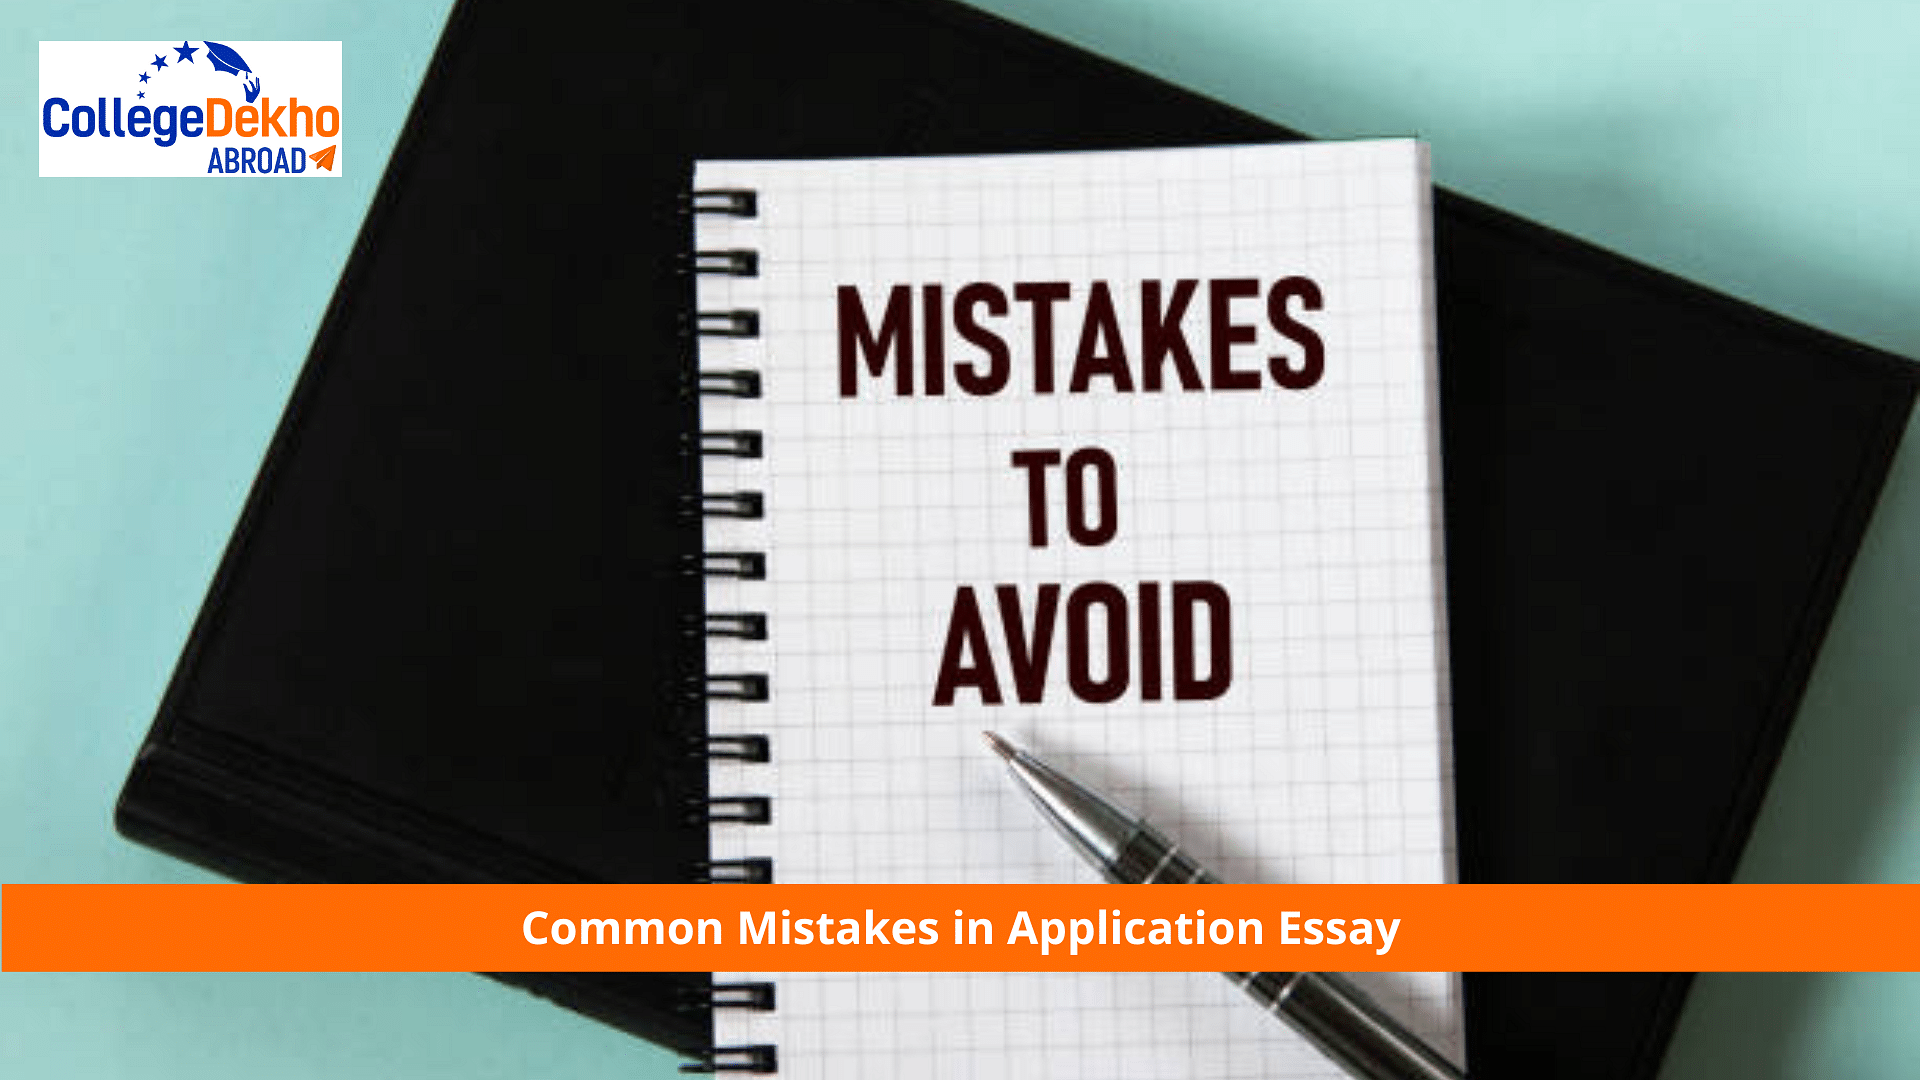 Common Mistakes in Application Essay